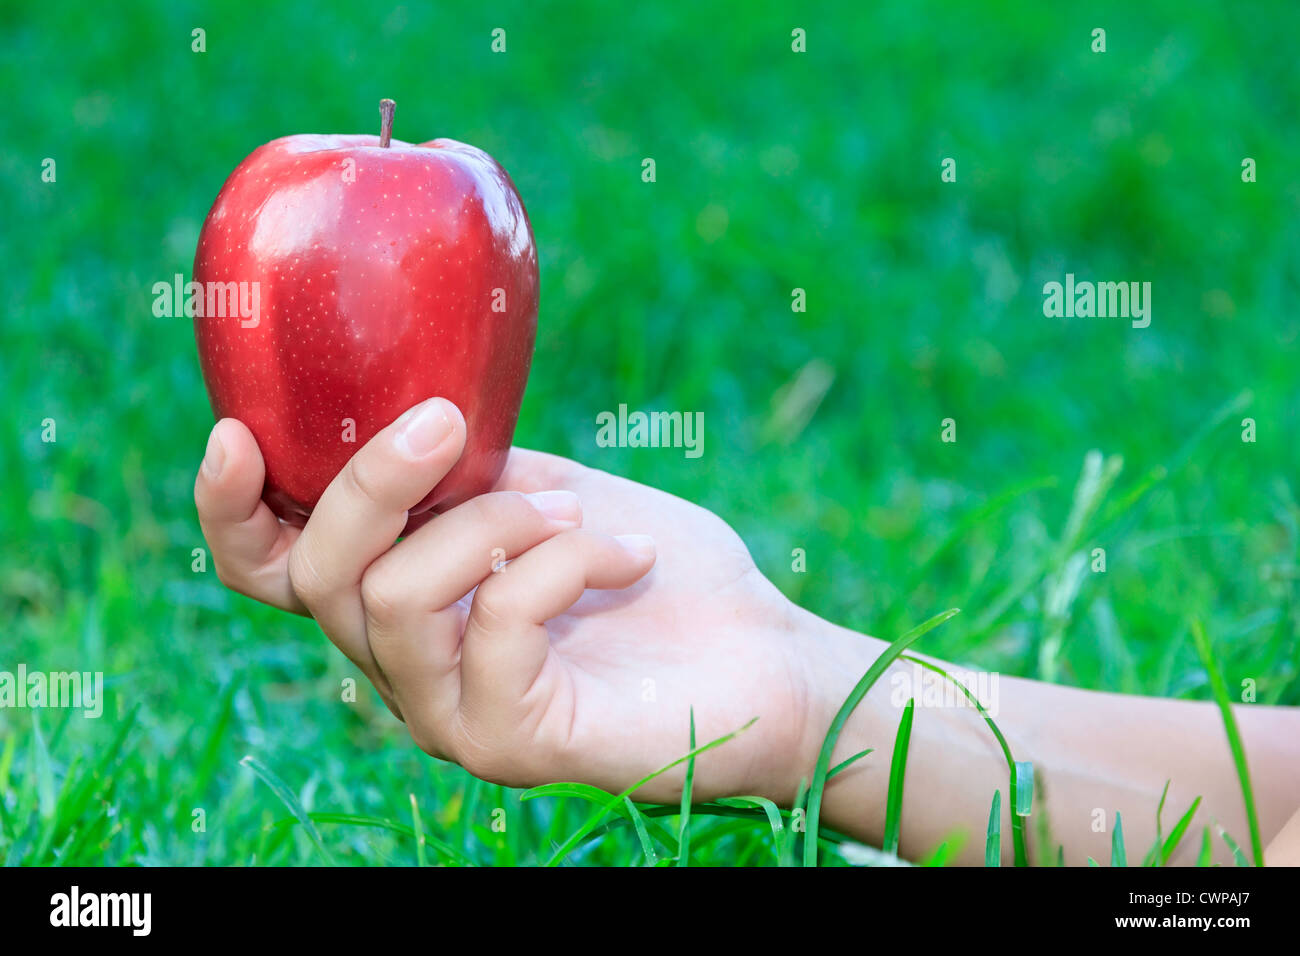 Hand holding a red apple against the grass Stock Photo